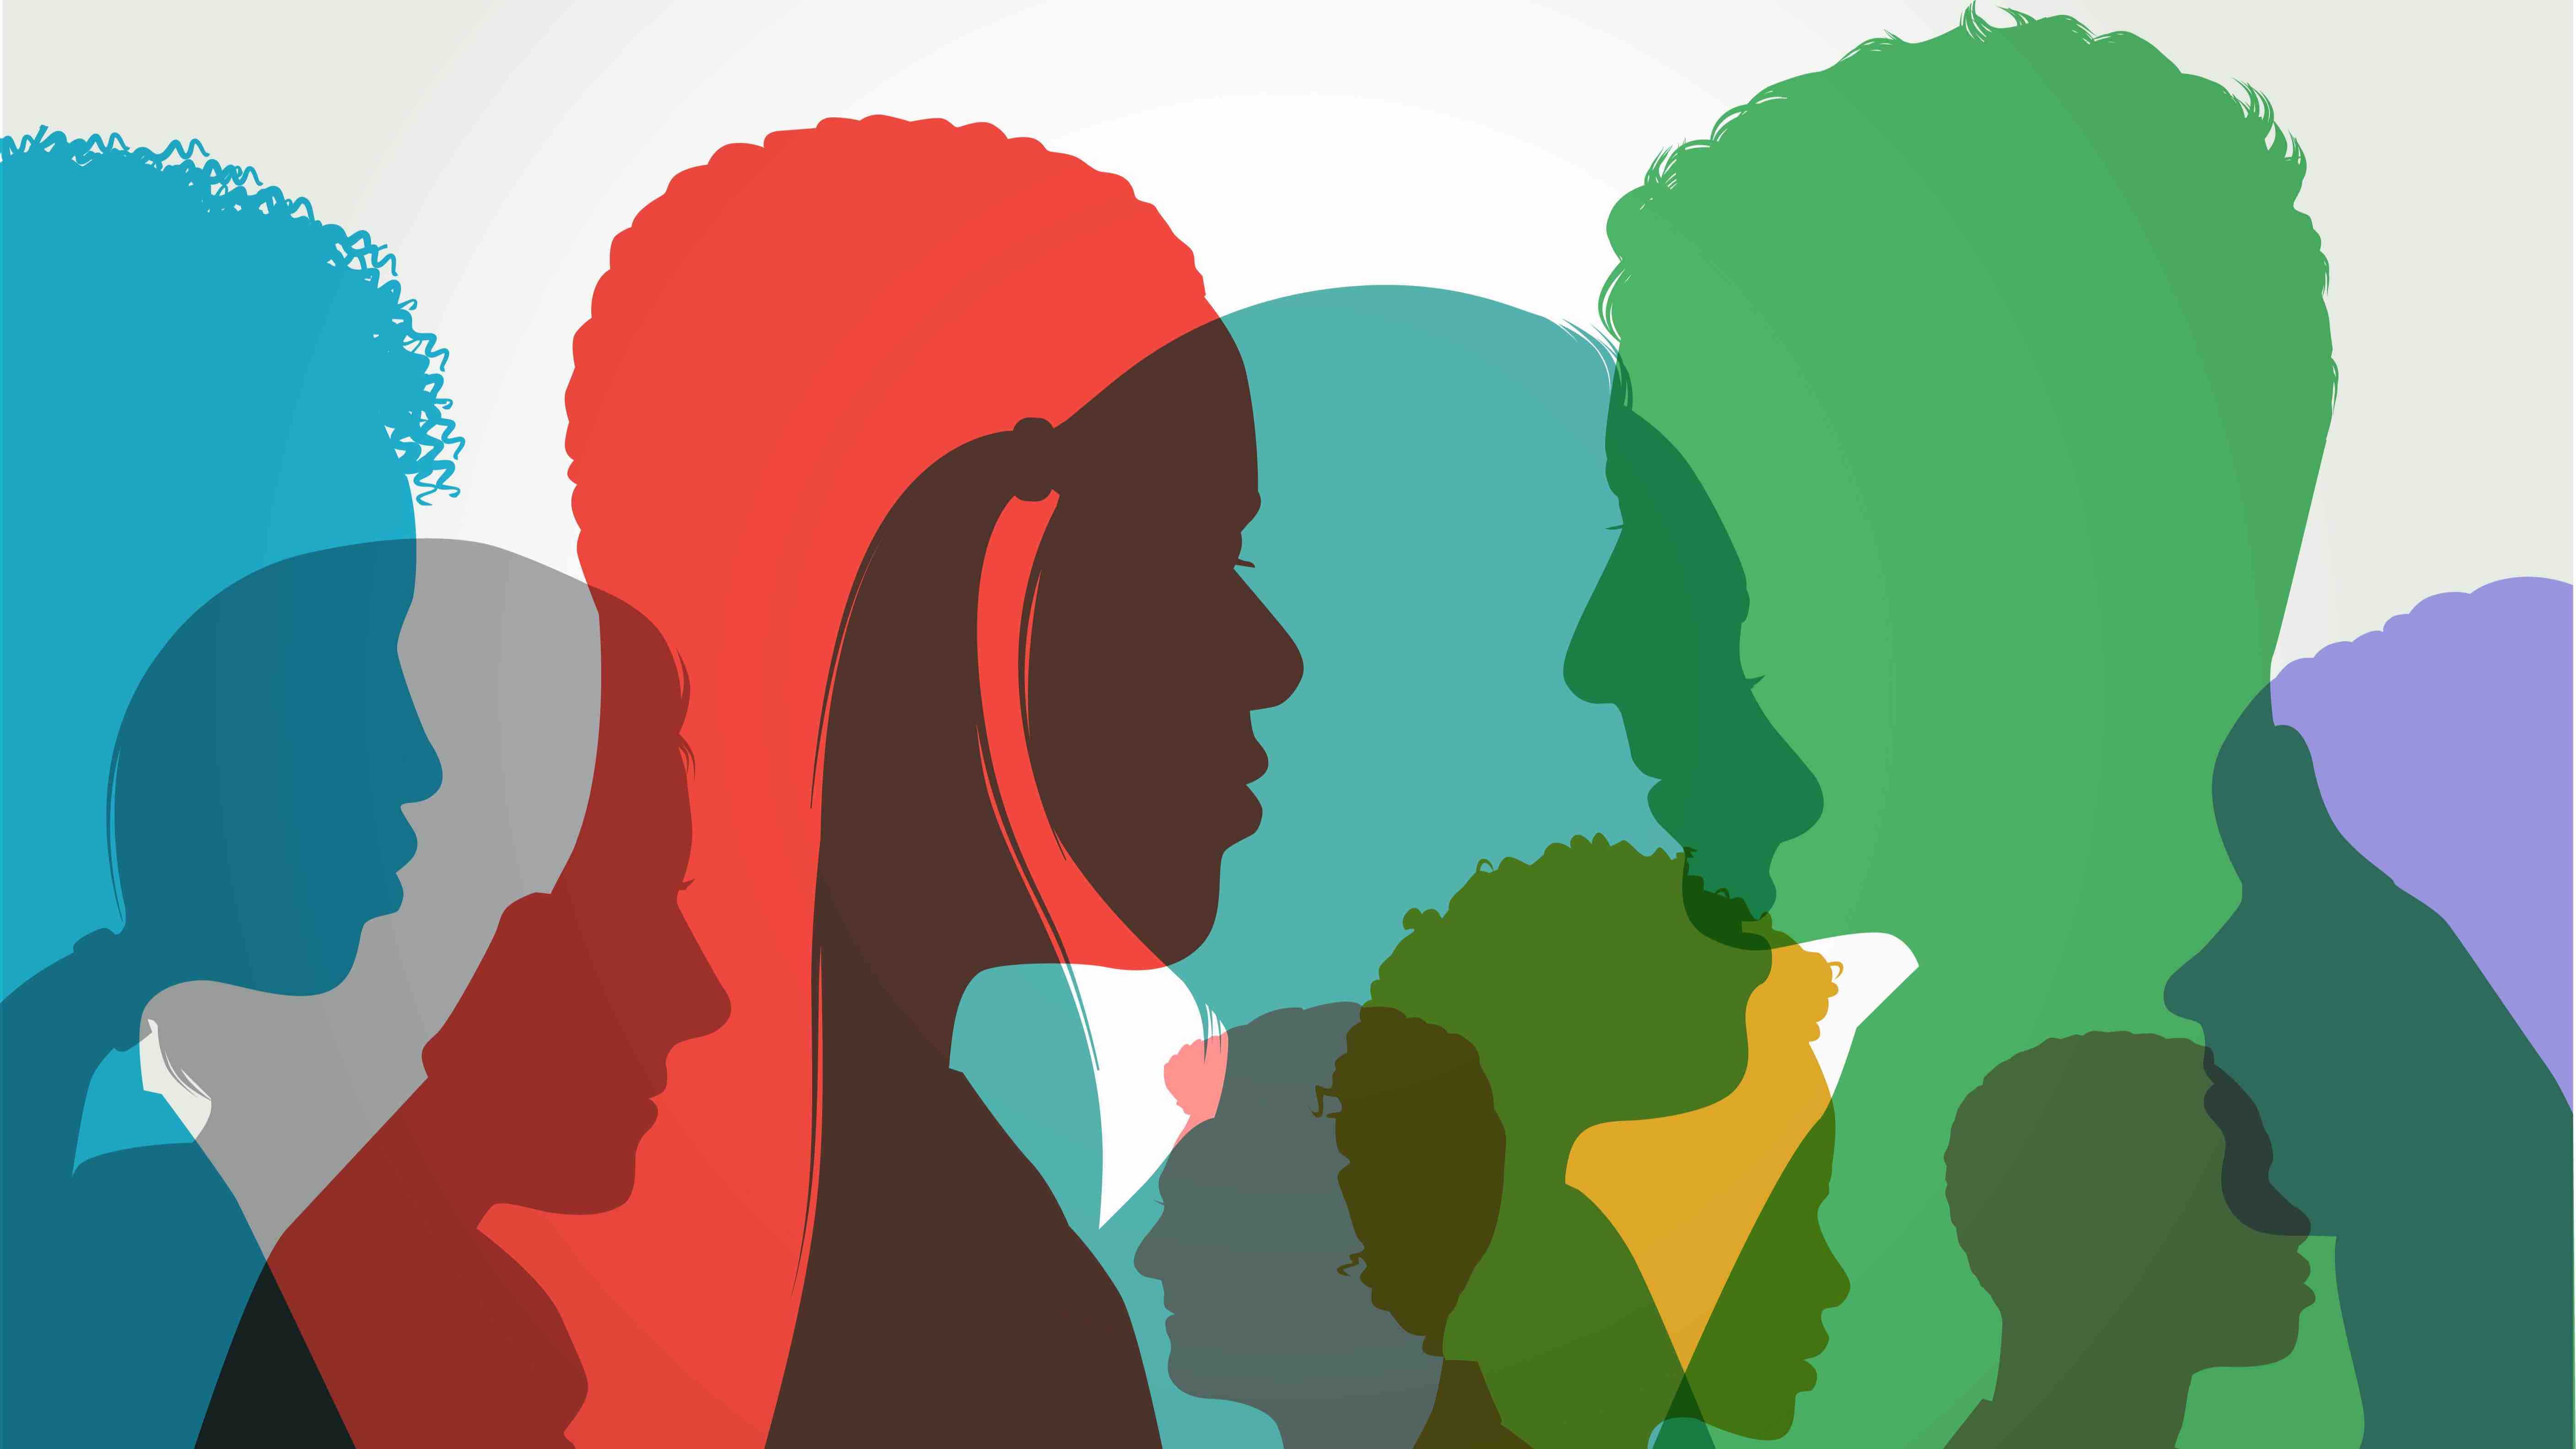 silhouettes of faces shown in blue, red, teal, green, purple and yellow